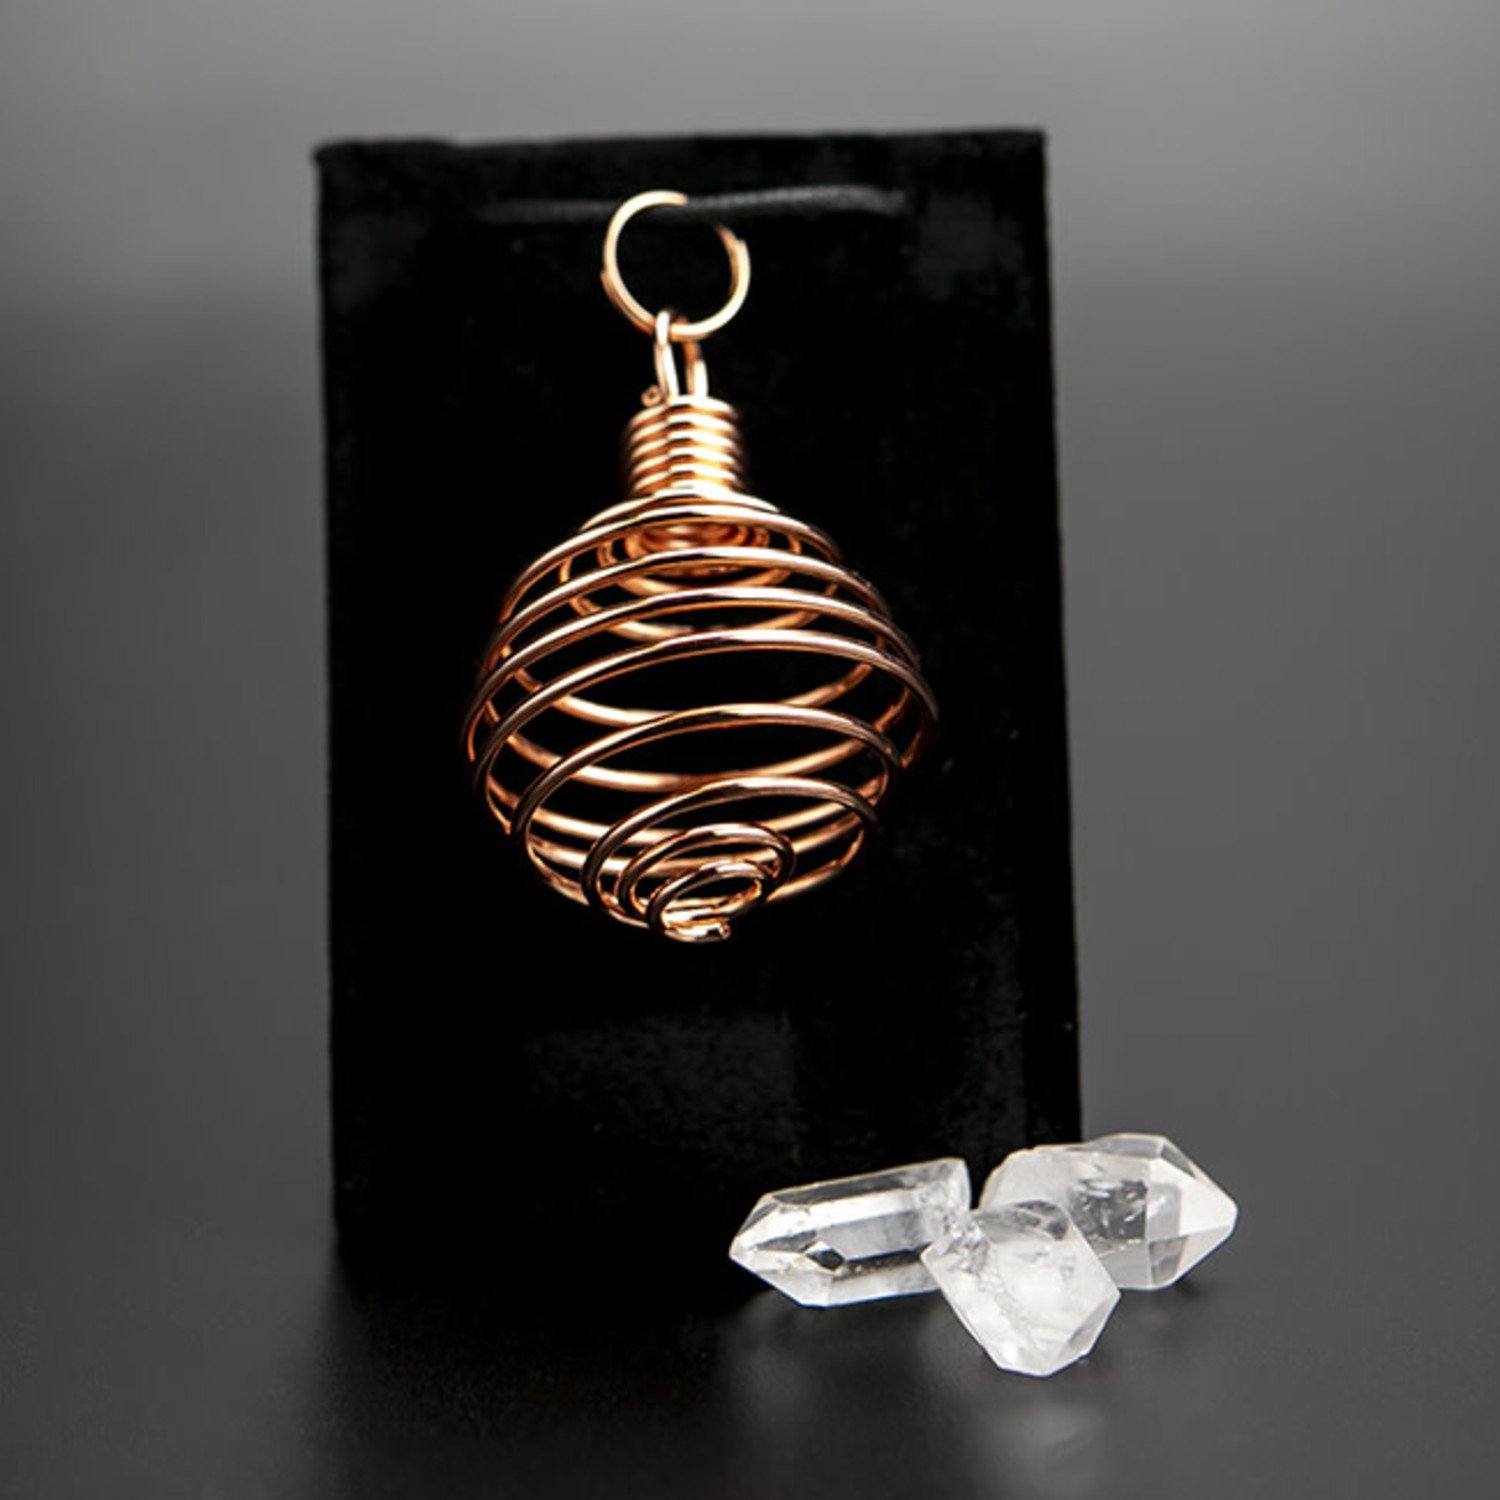 Metal Crystal Cage Necklace with Surprise Crystal